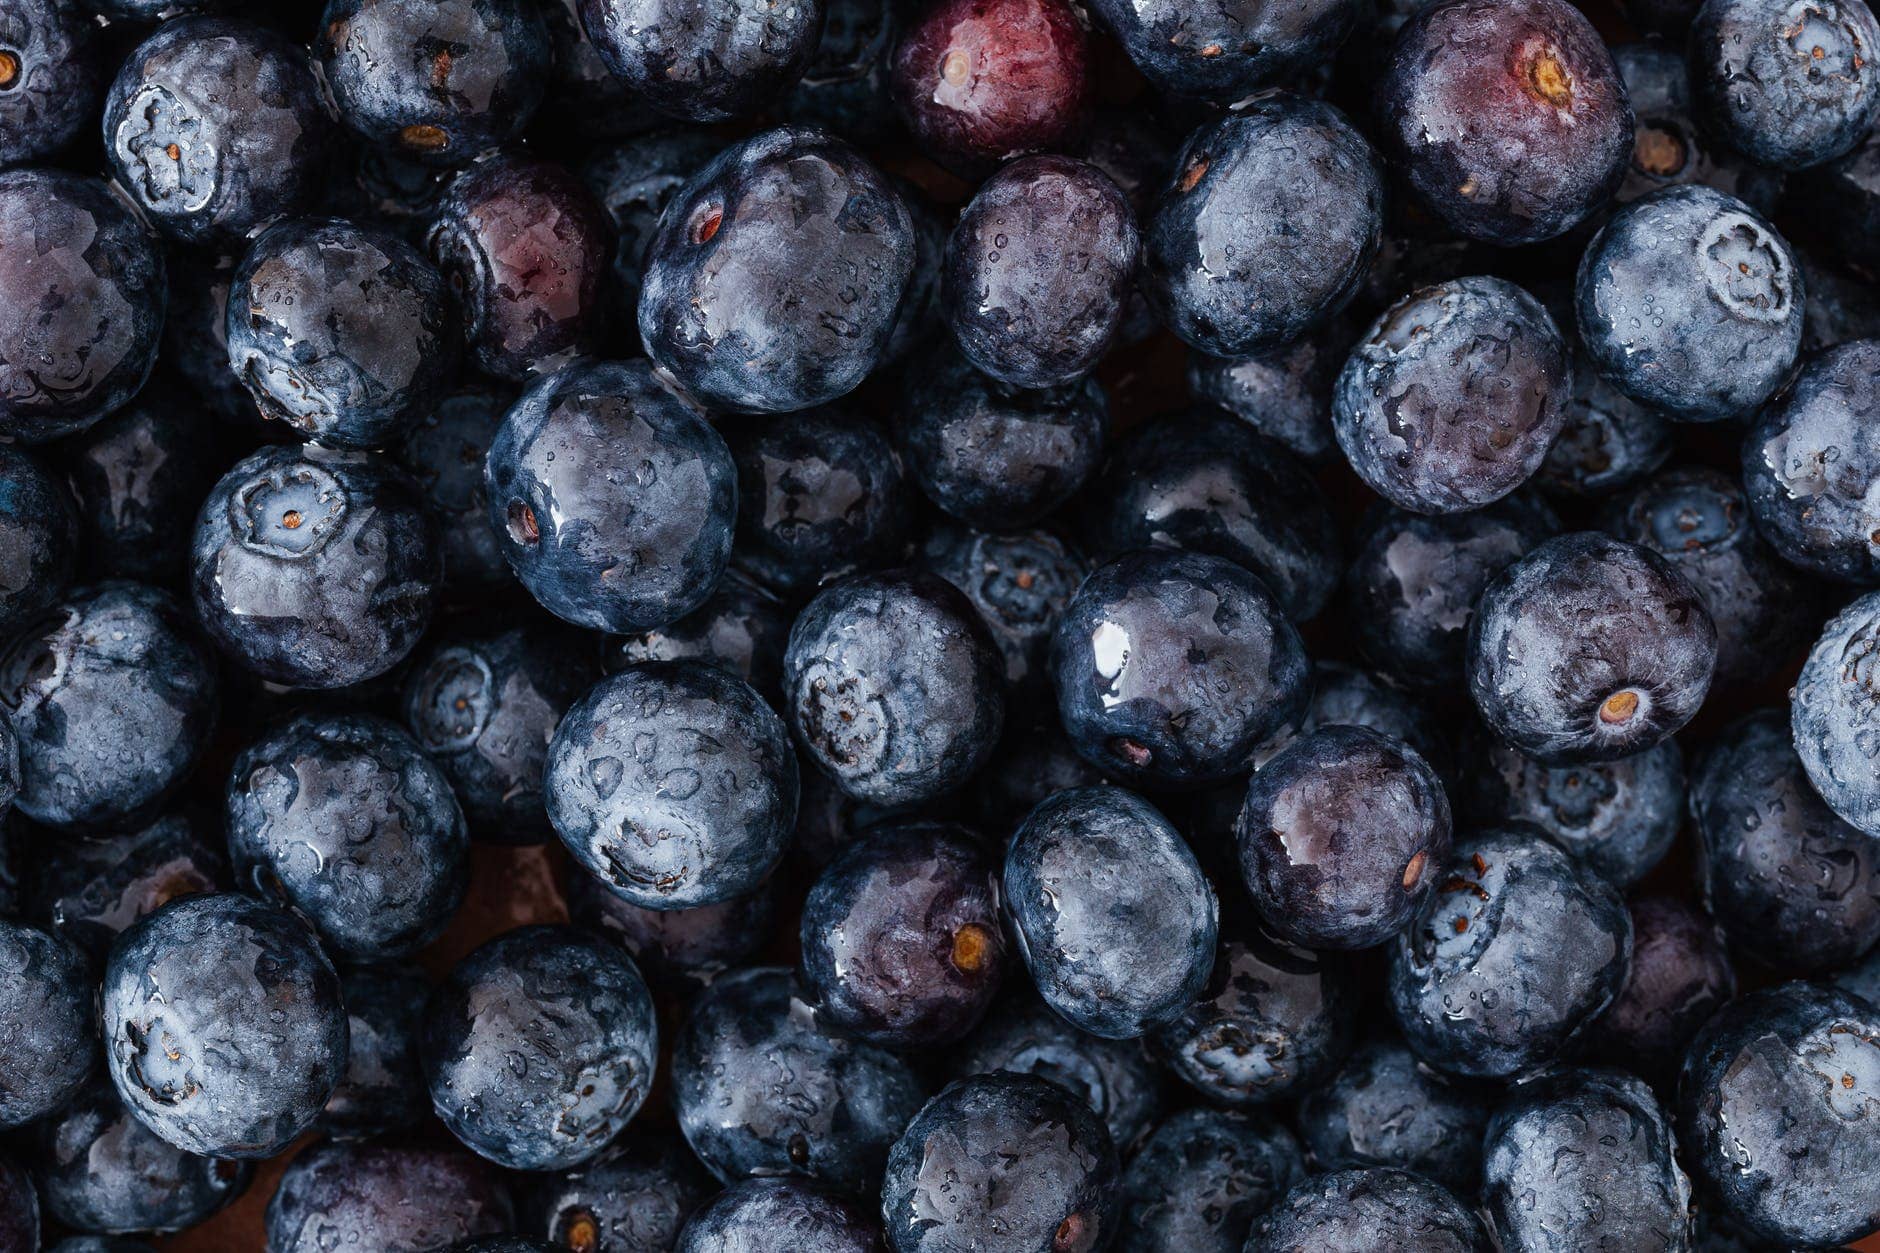 bunch of delicious ripe blueberries lying on market stall